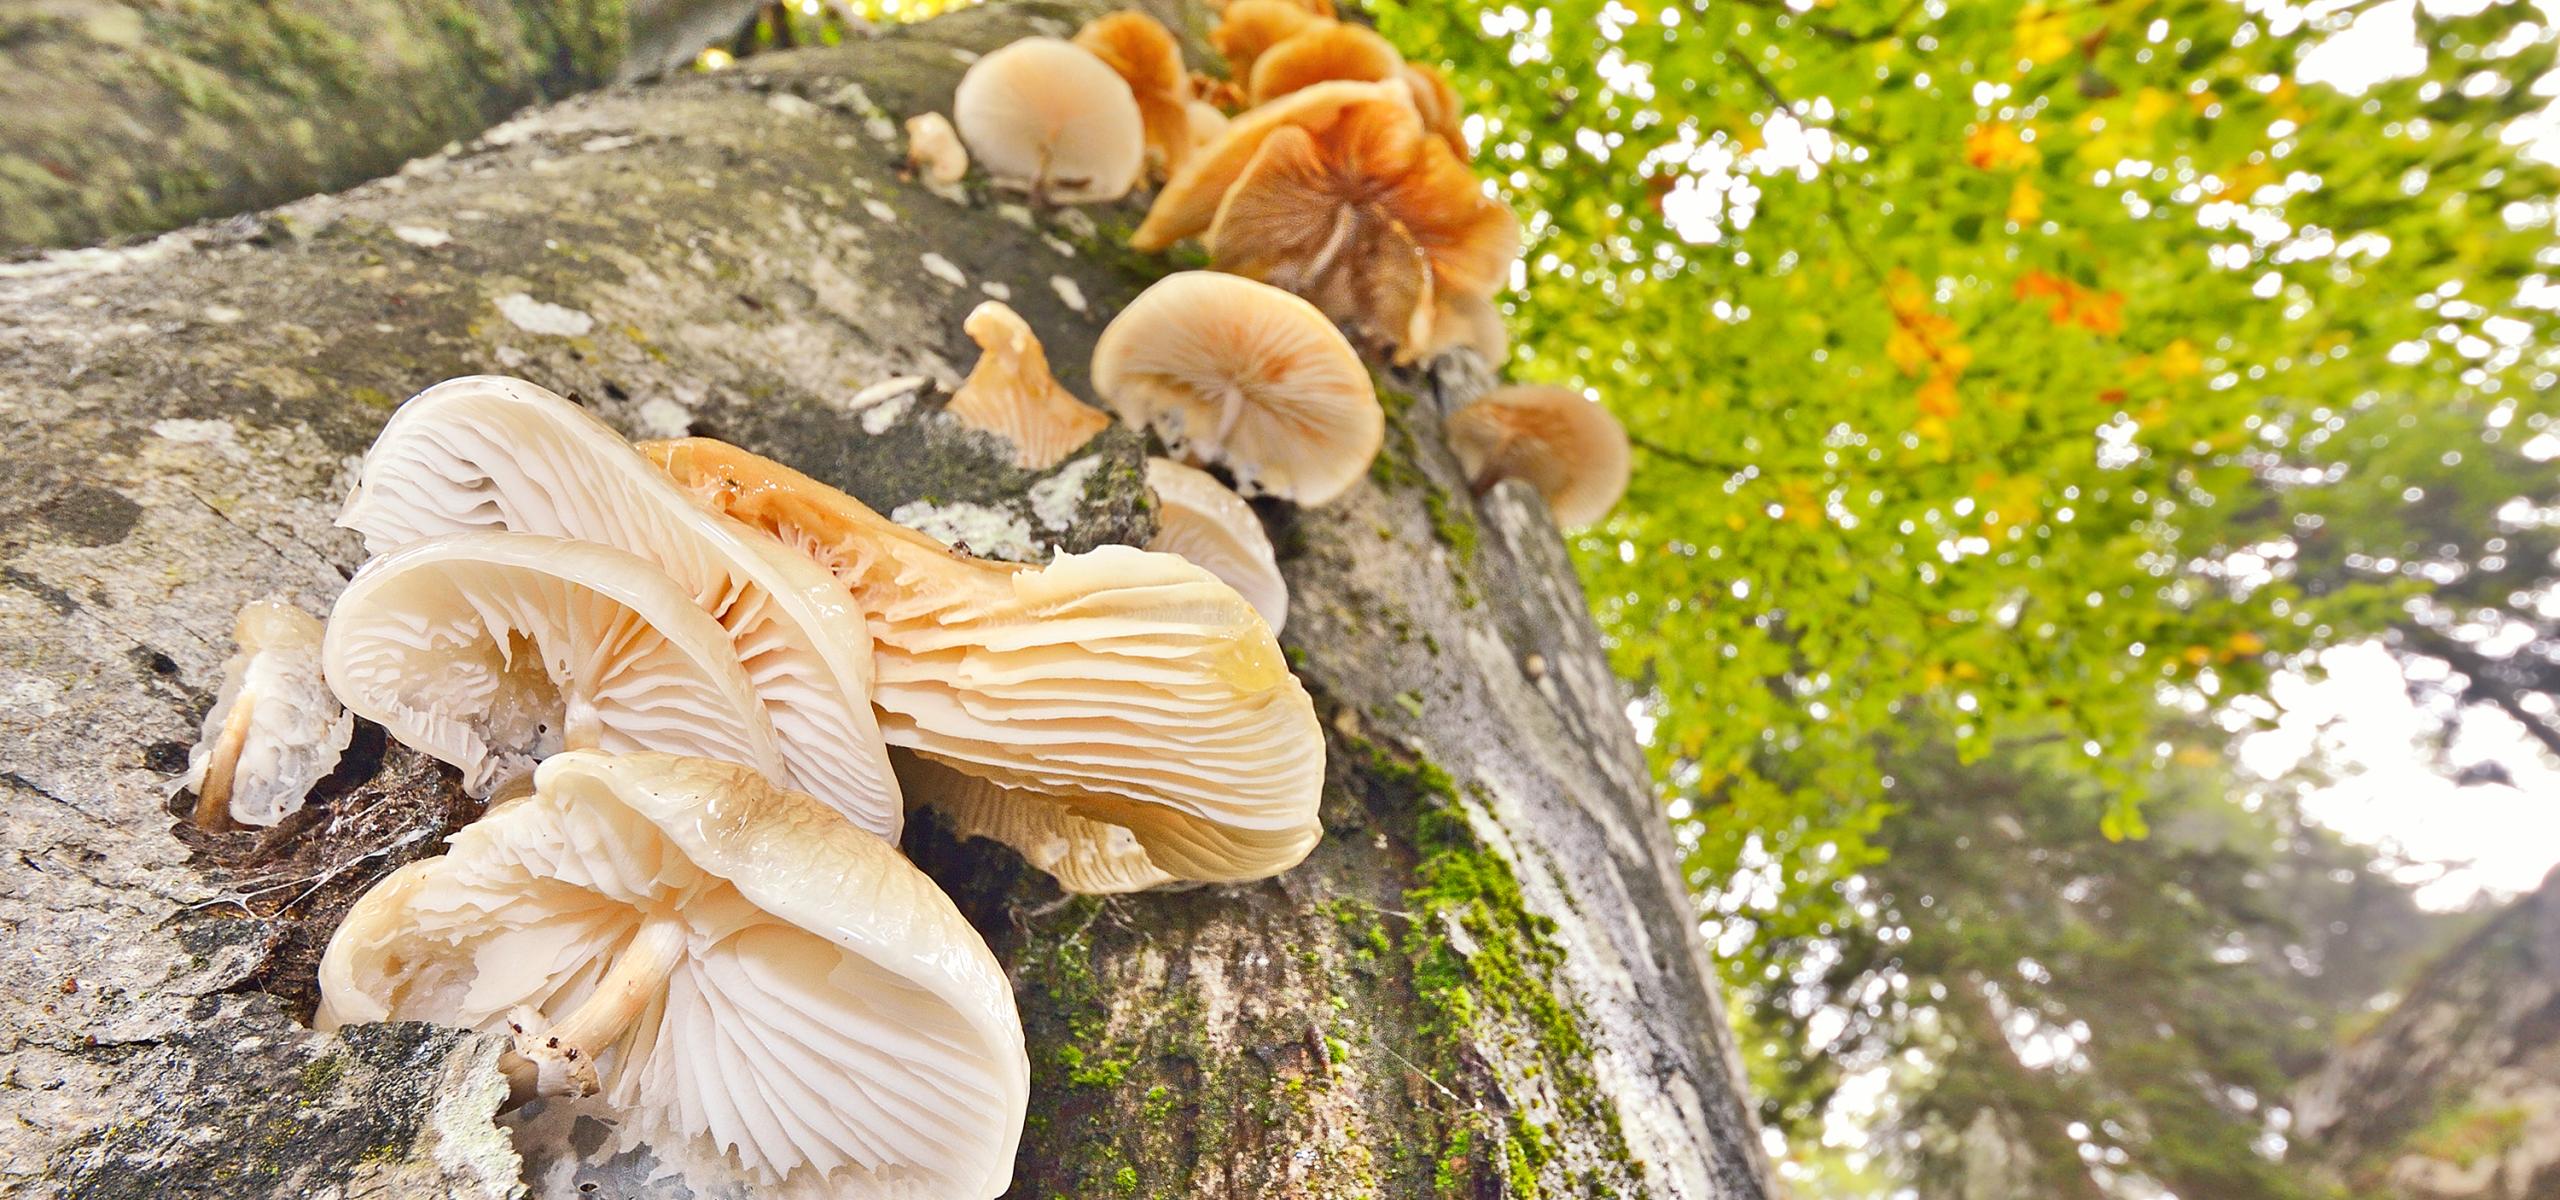 Tree fungi grow from the trunk of a beech tree